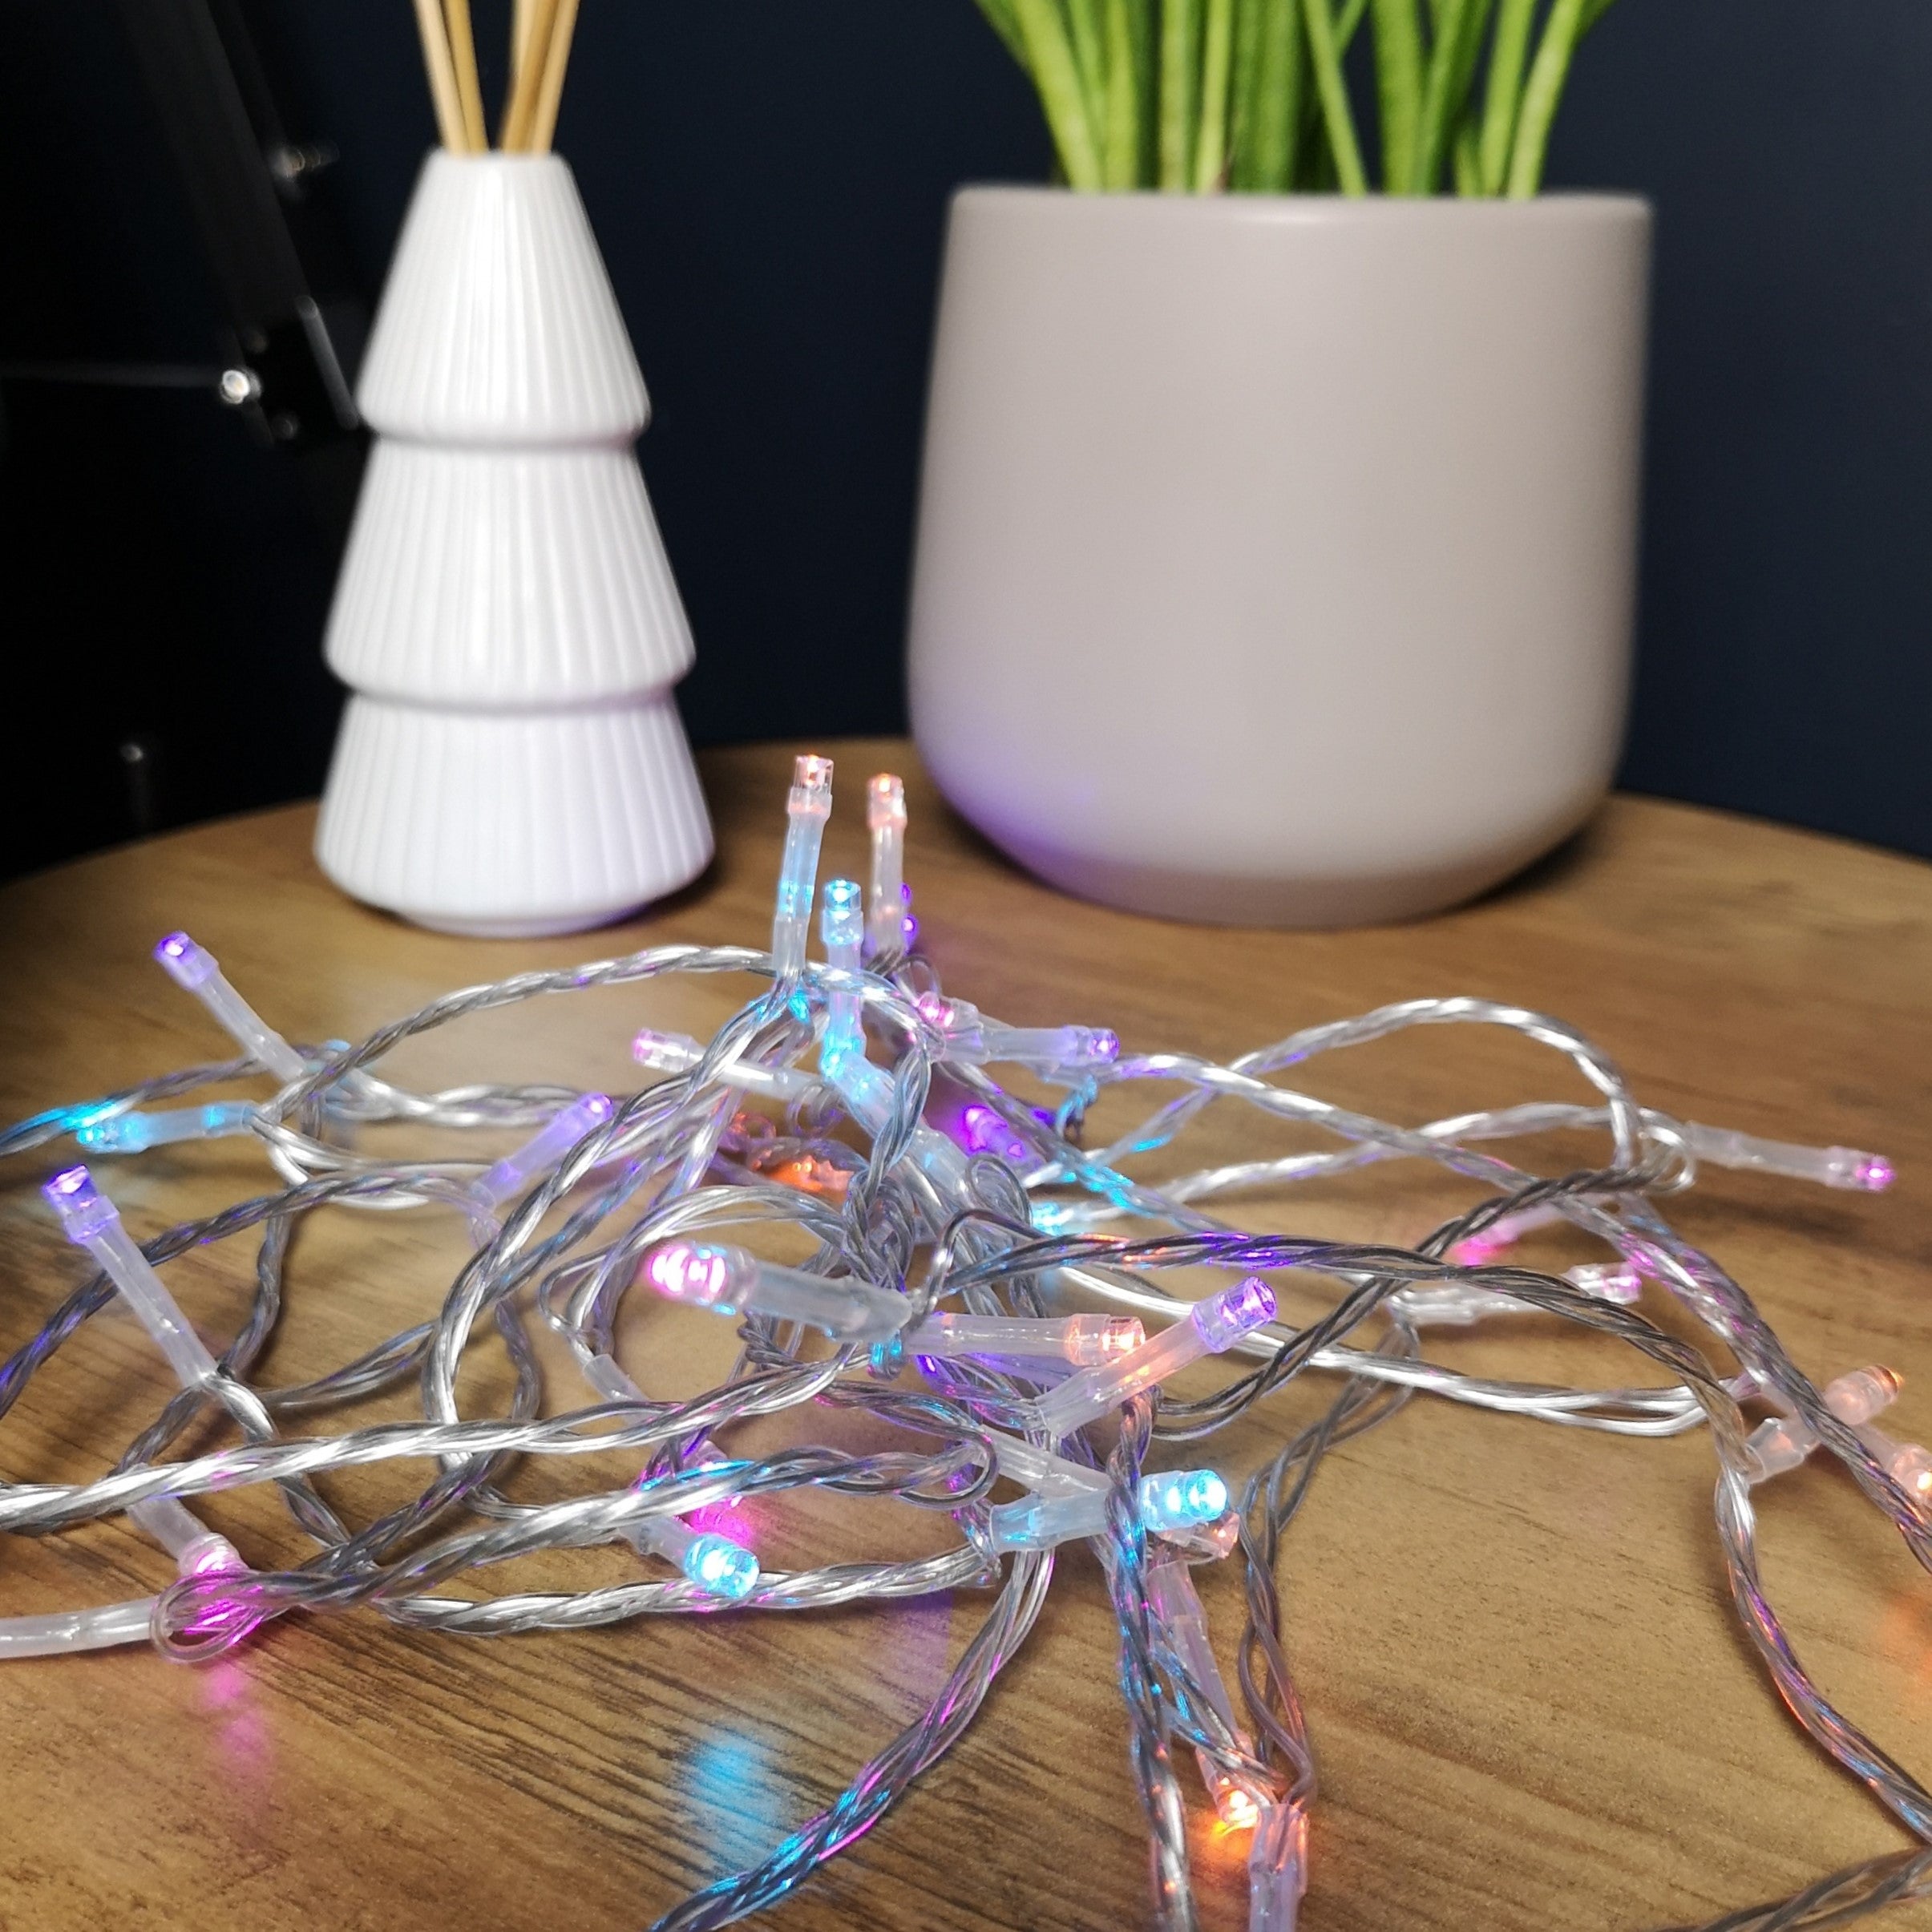 20m Battery Operated Indoor Outdoor Christmas String Lights with 200 LEDs in Rainbow